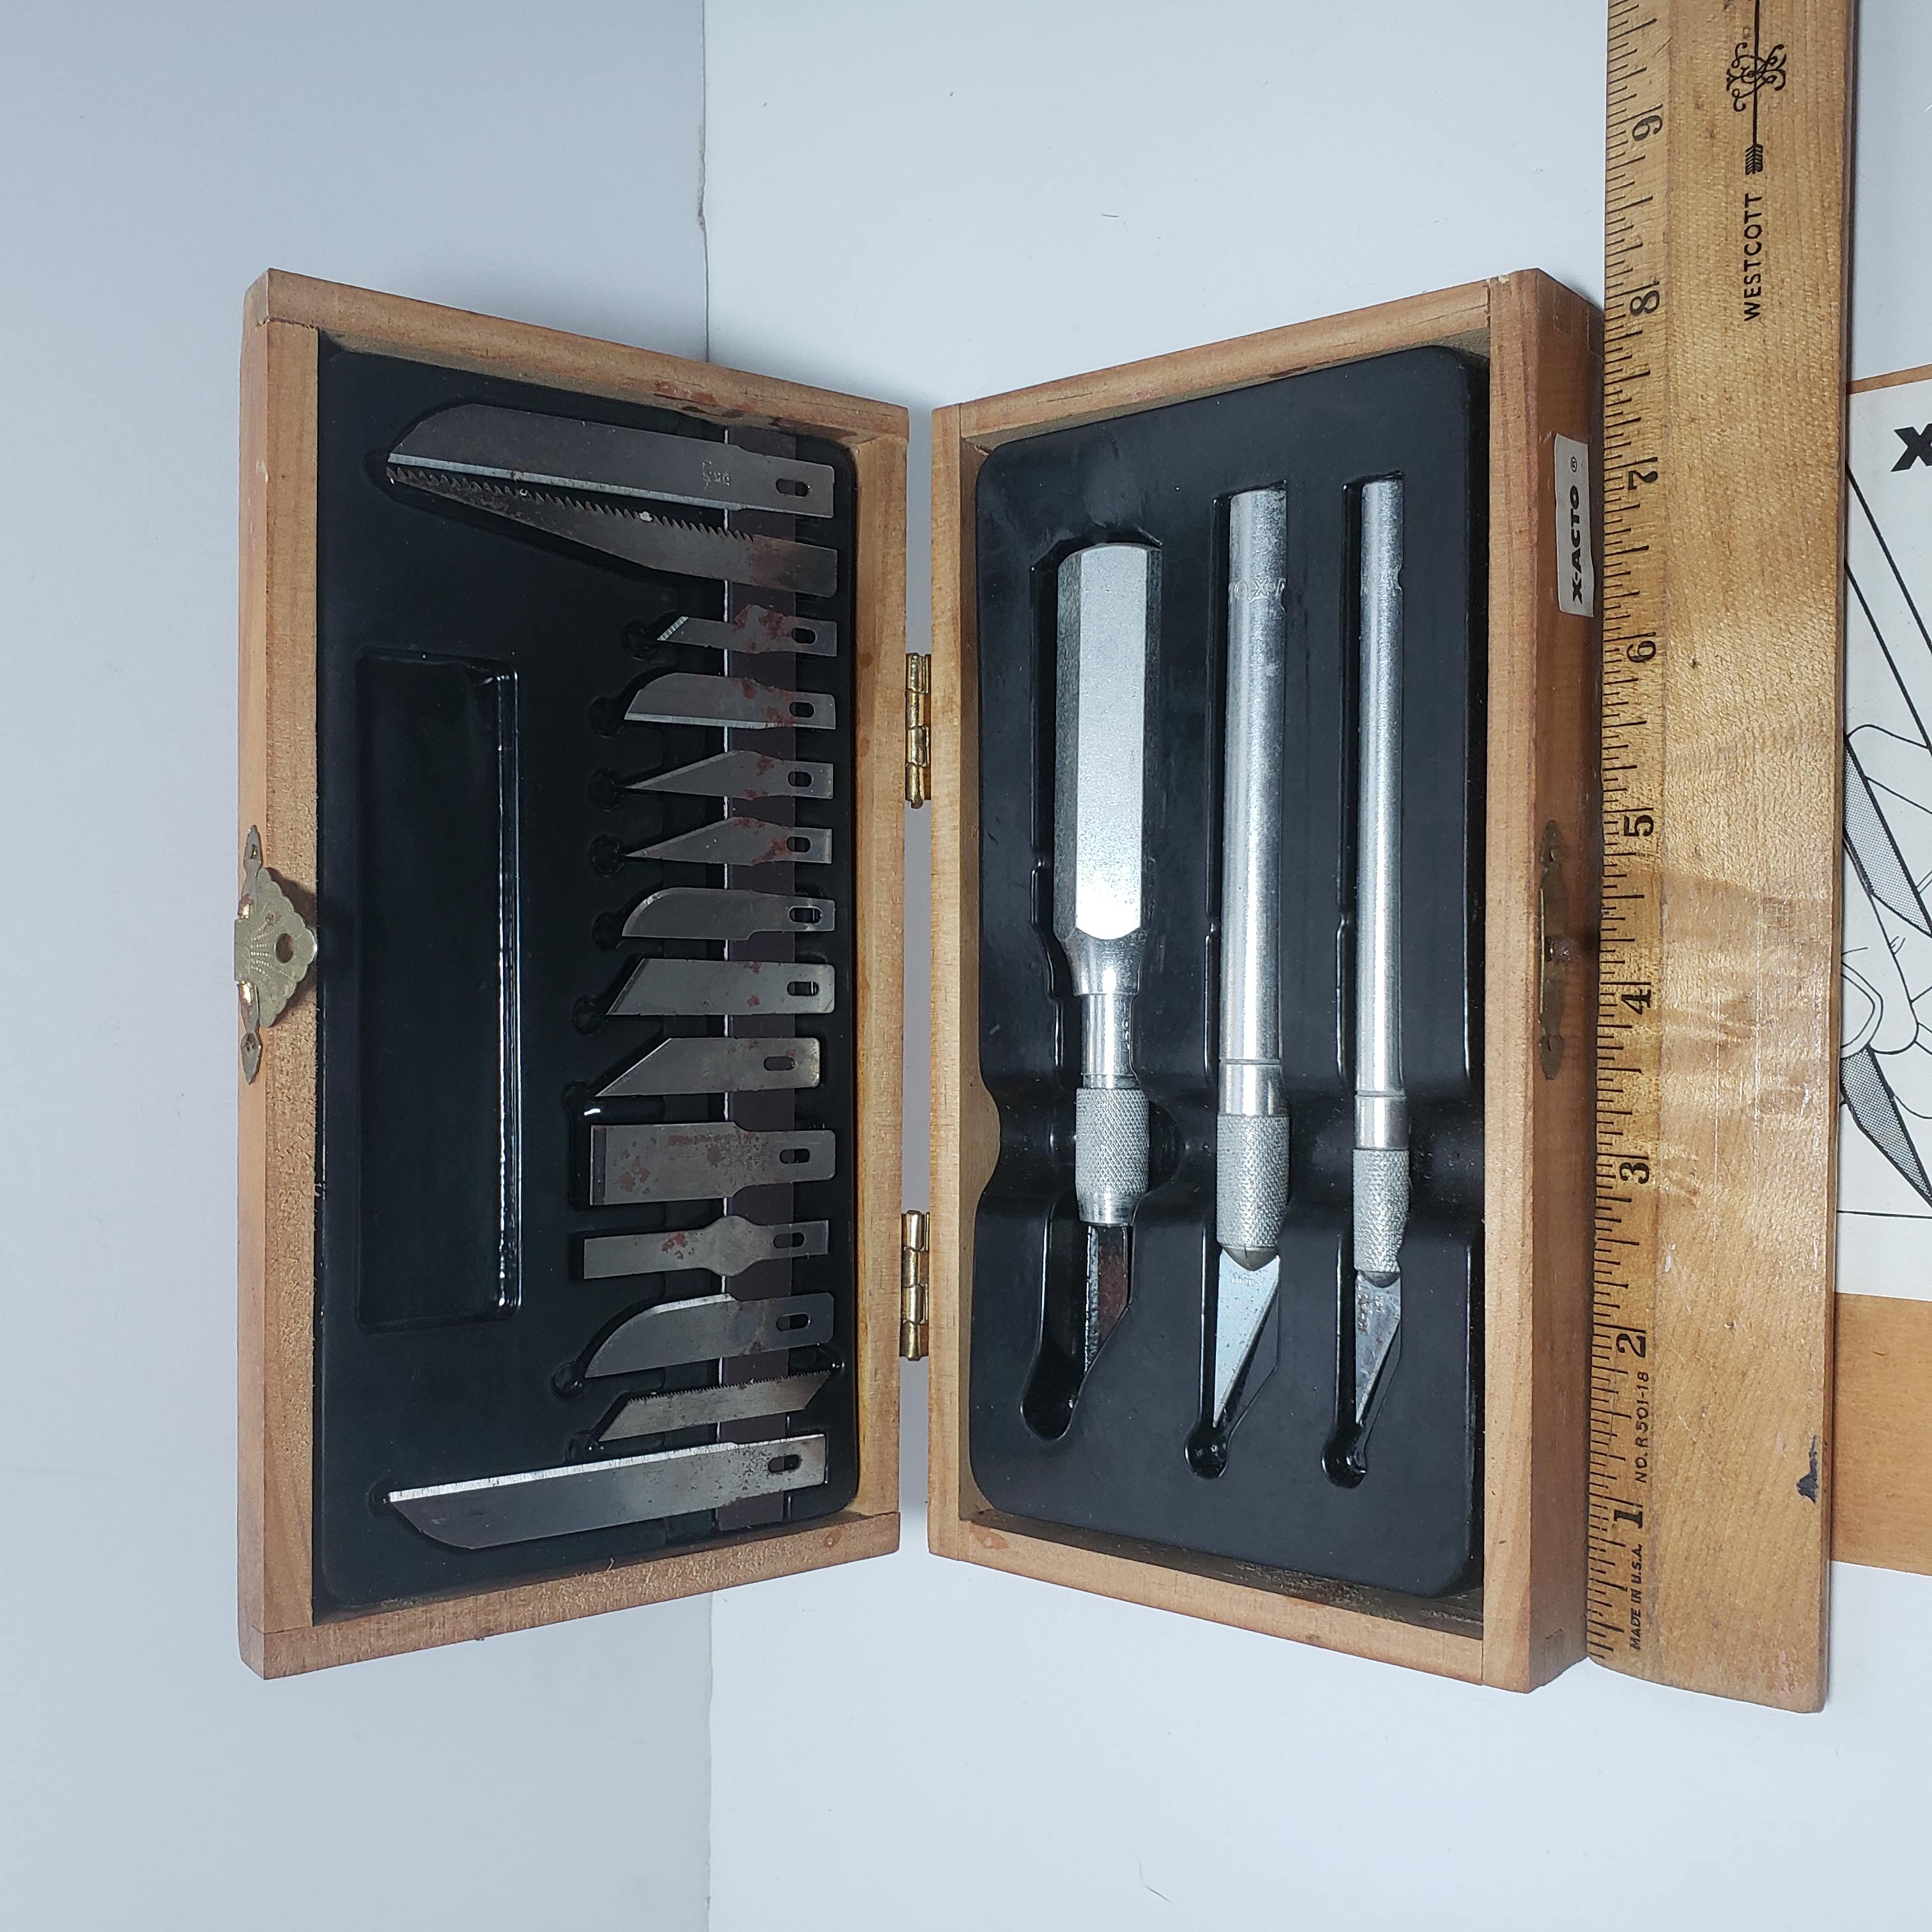 The Ultimate Model Railroad Collection with X-ACTO Knife Set